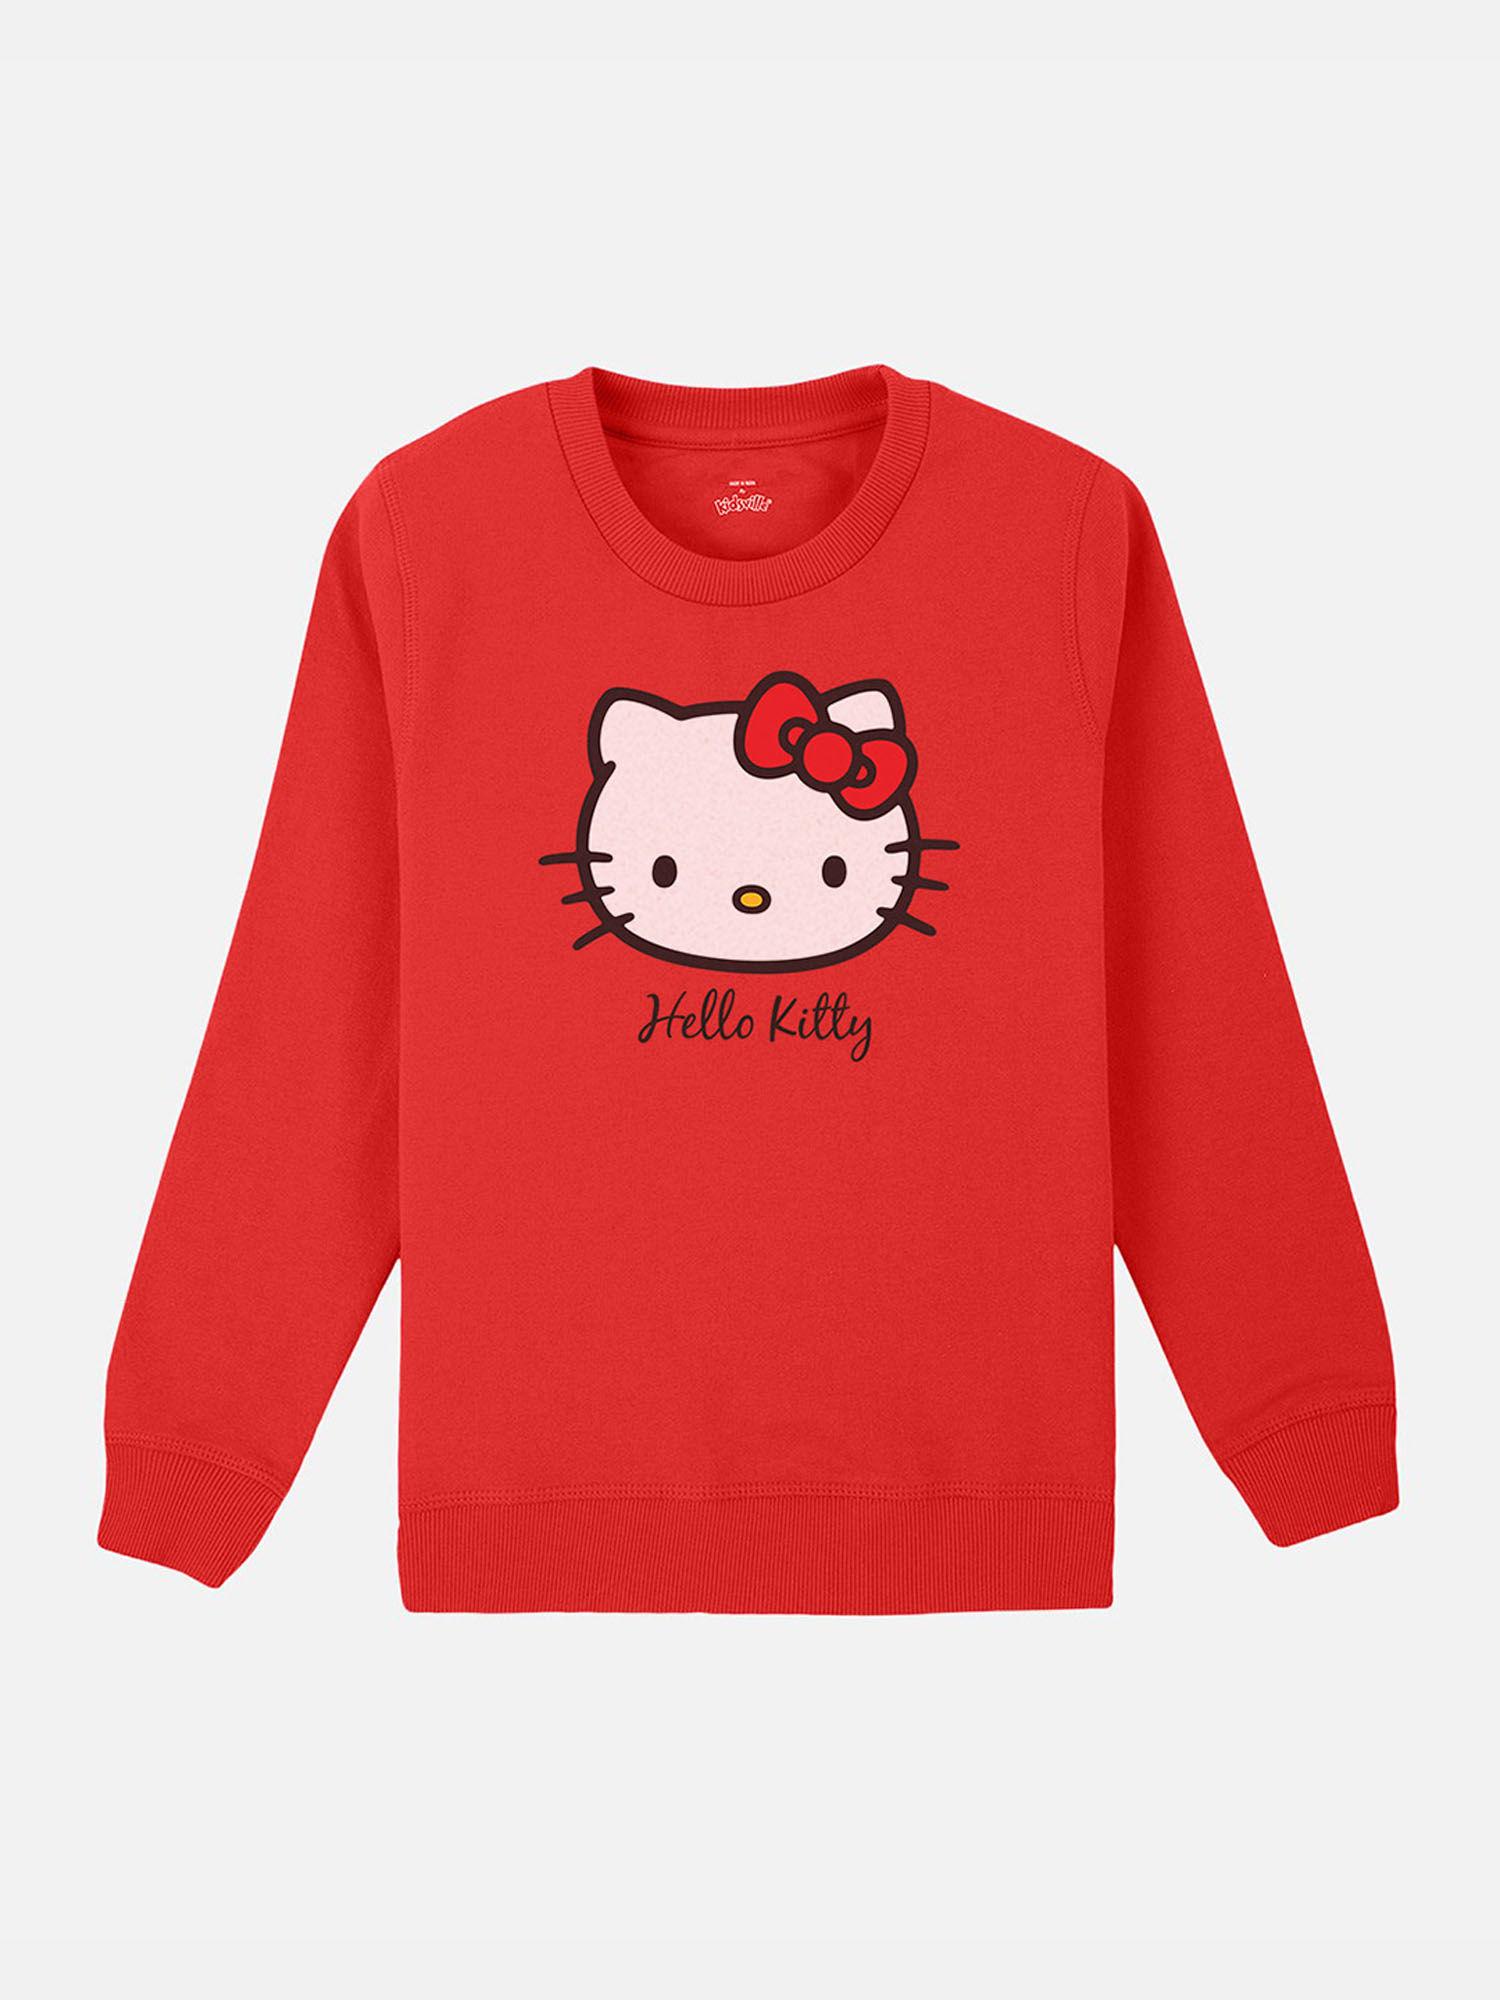 hello kitty printed red full sleeve sweater